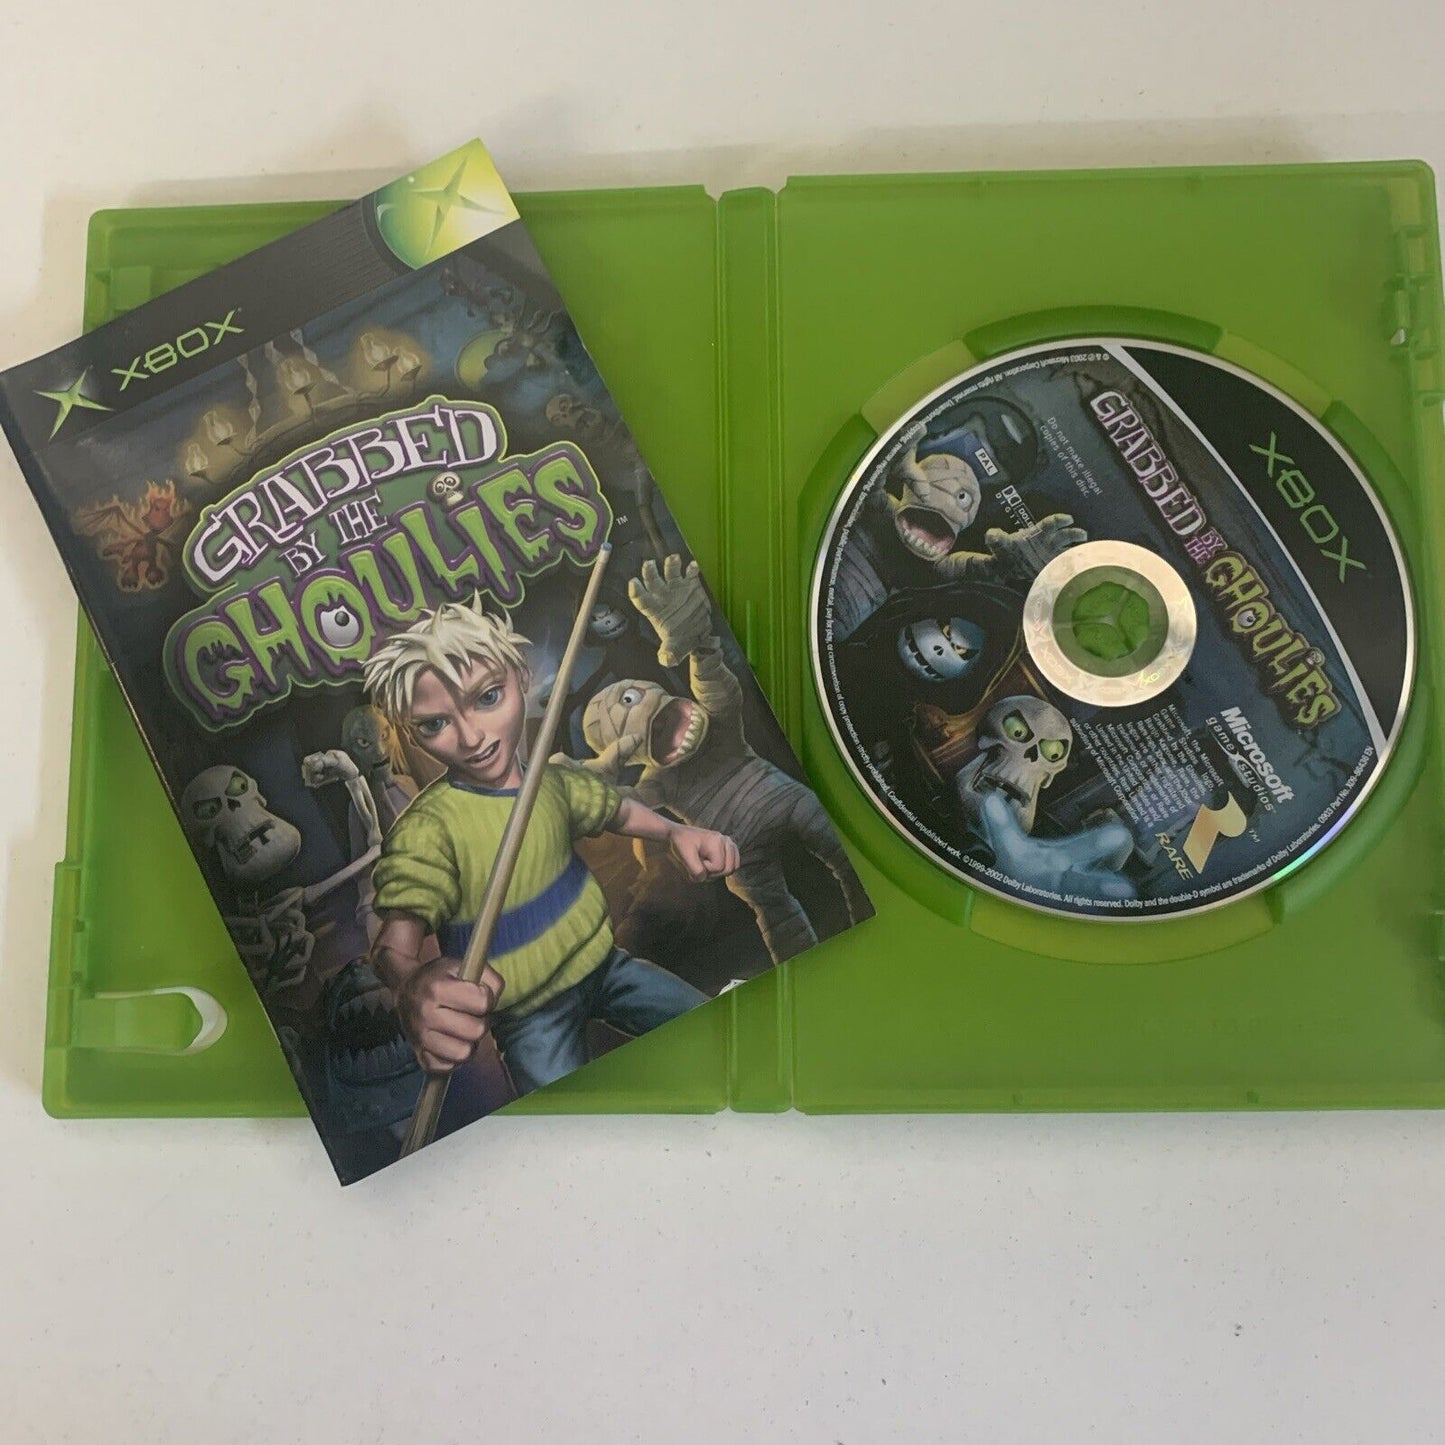 Grabbed By The Ghoulies Xbox Original Game